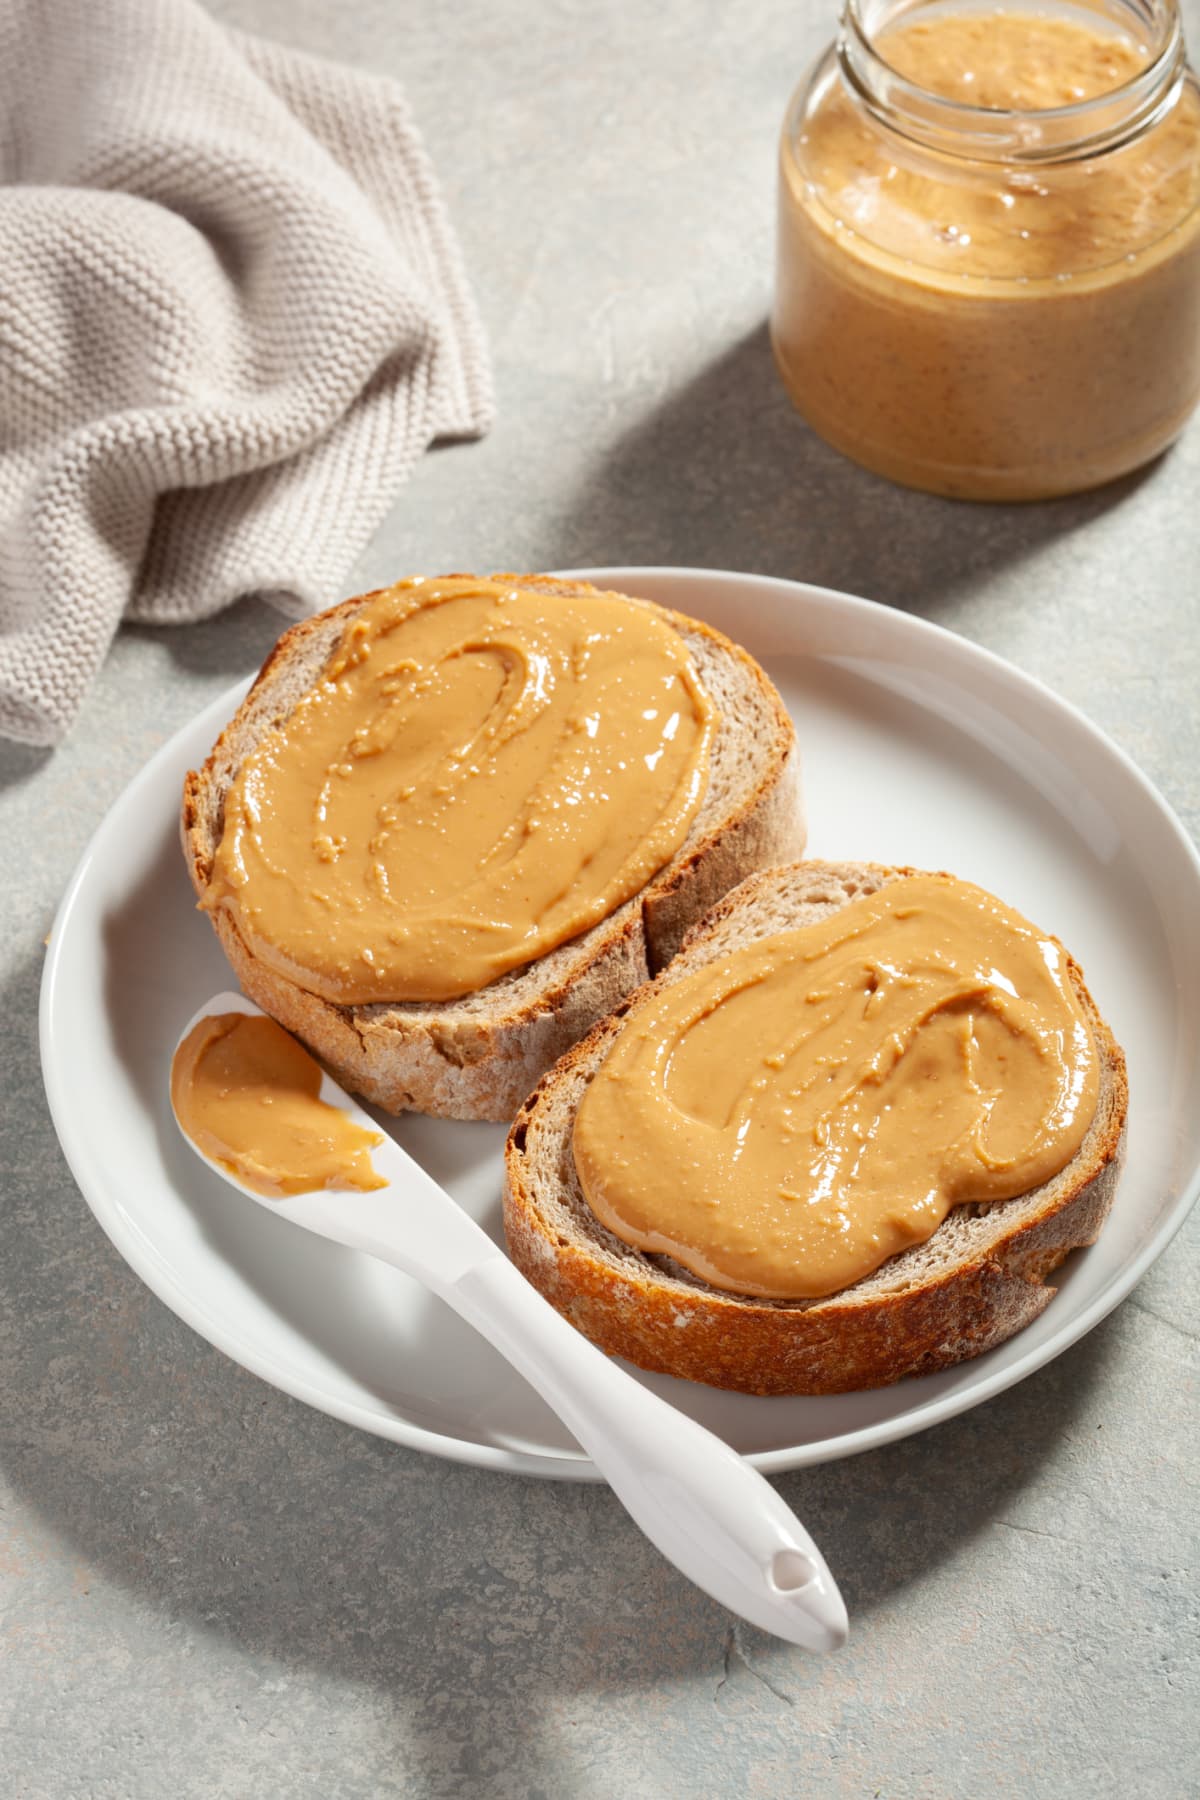 Sliced peanut butter bread on a plate